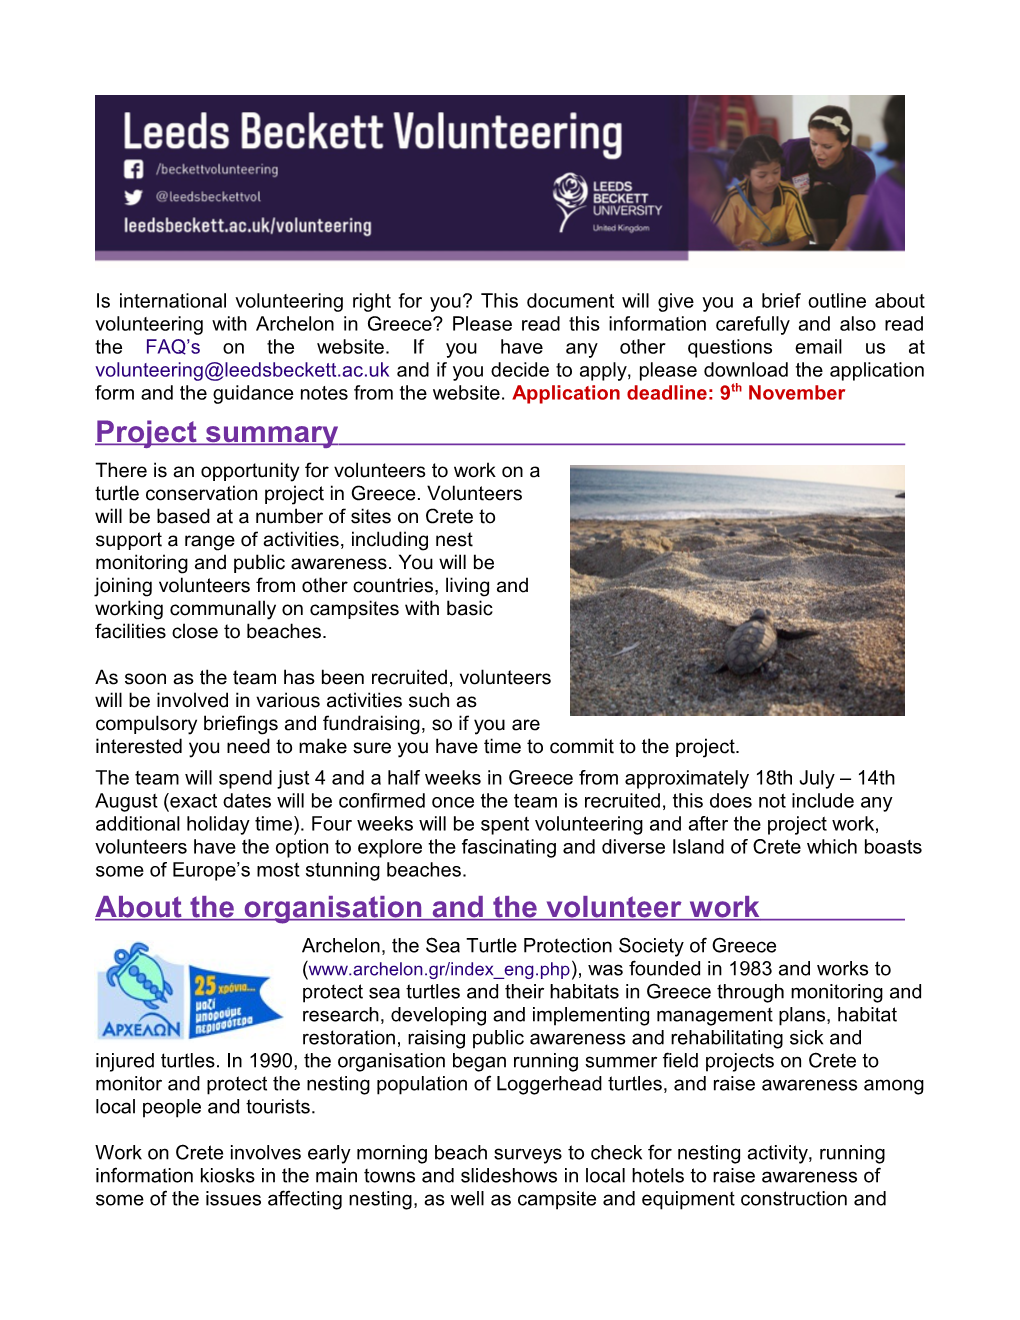 About the Organisation and the Volunteer Work